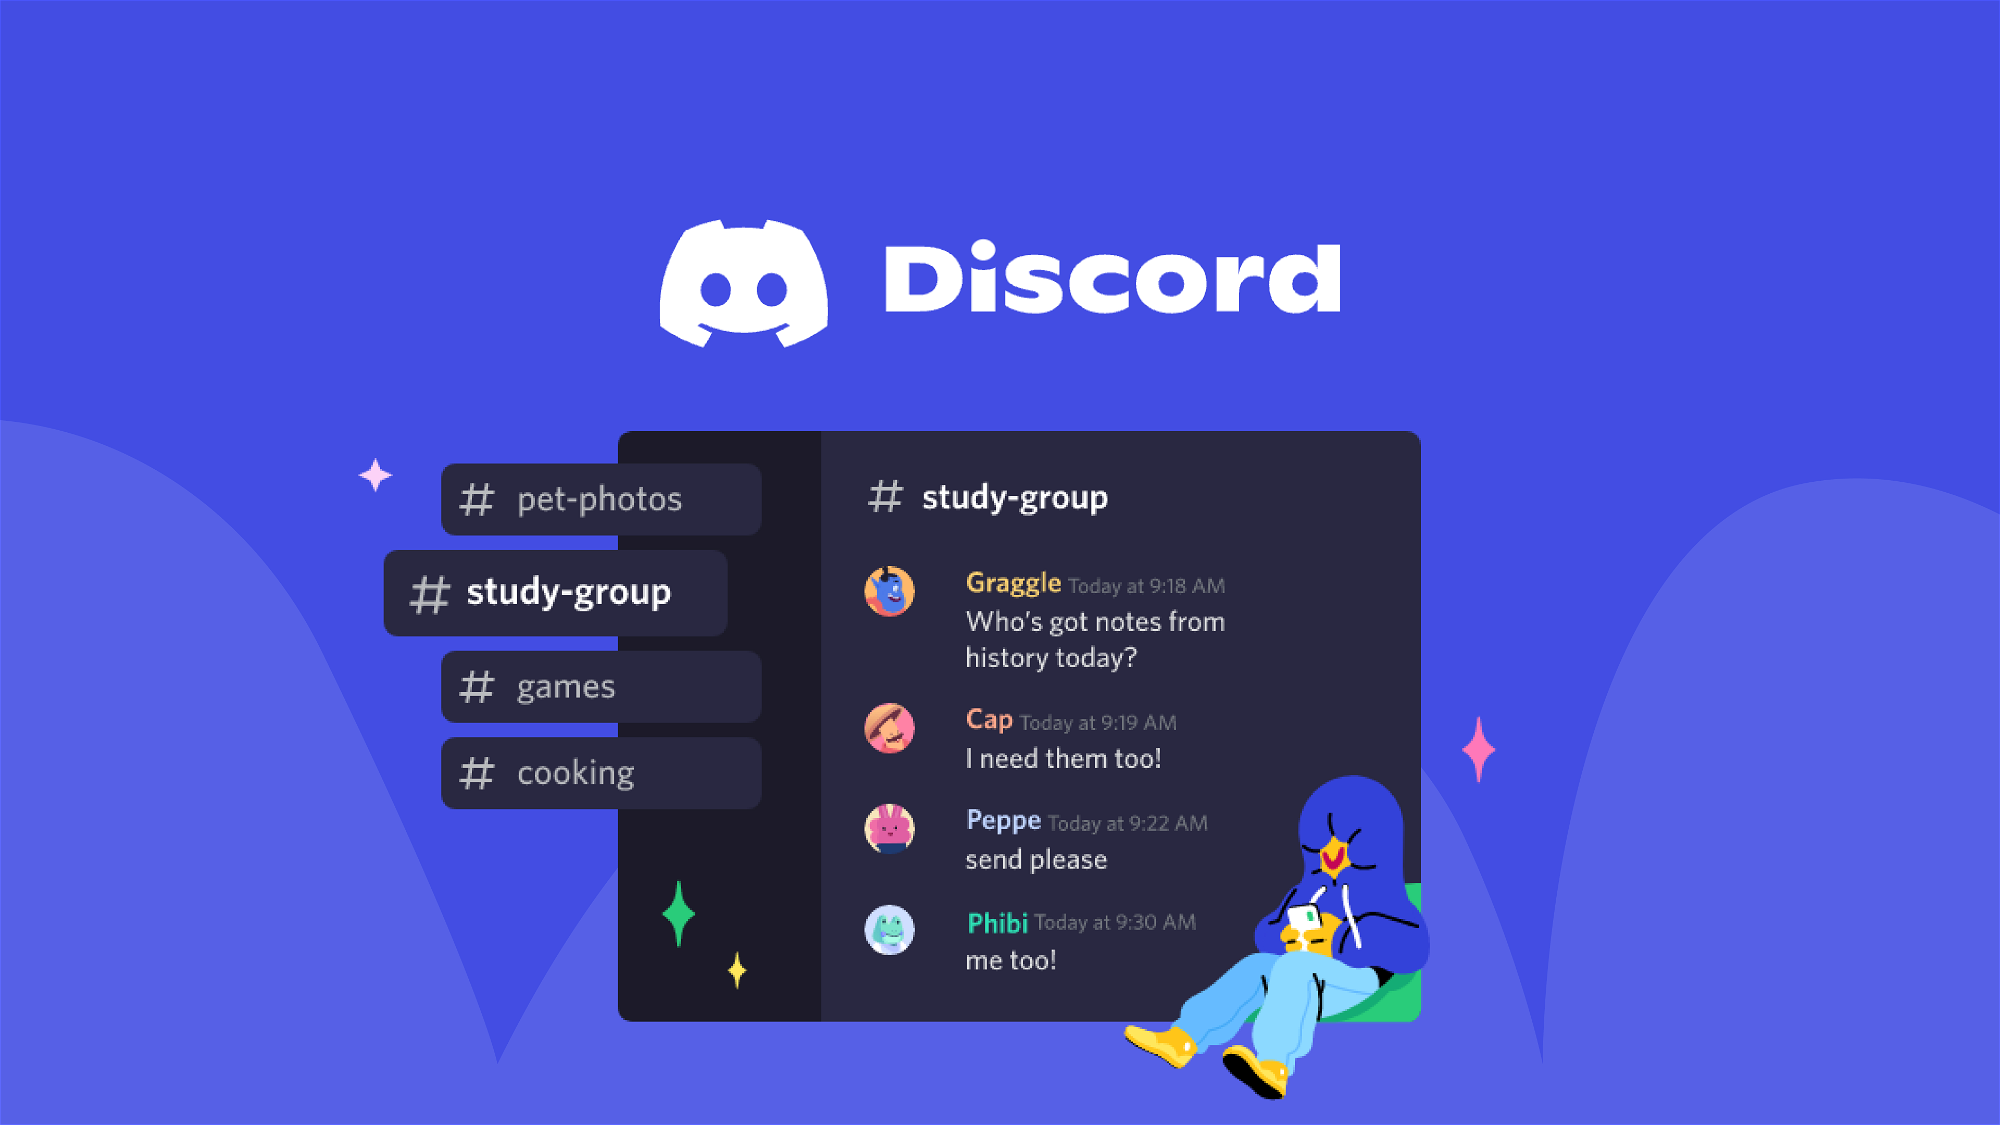 Discord - Build and engage with your biggest fans | AppSumo